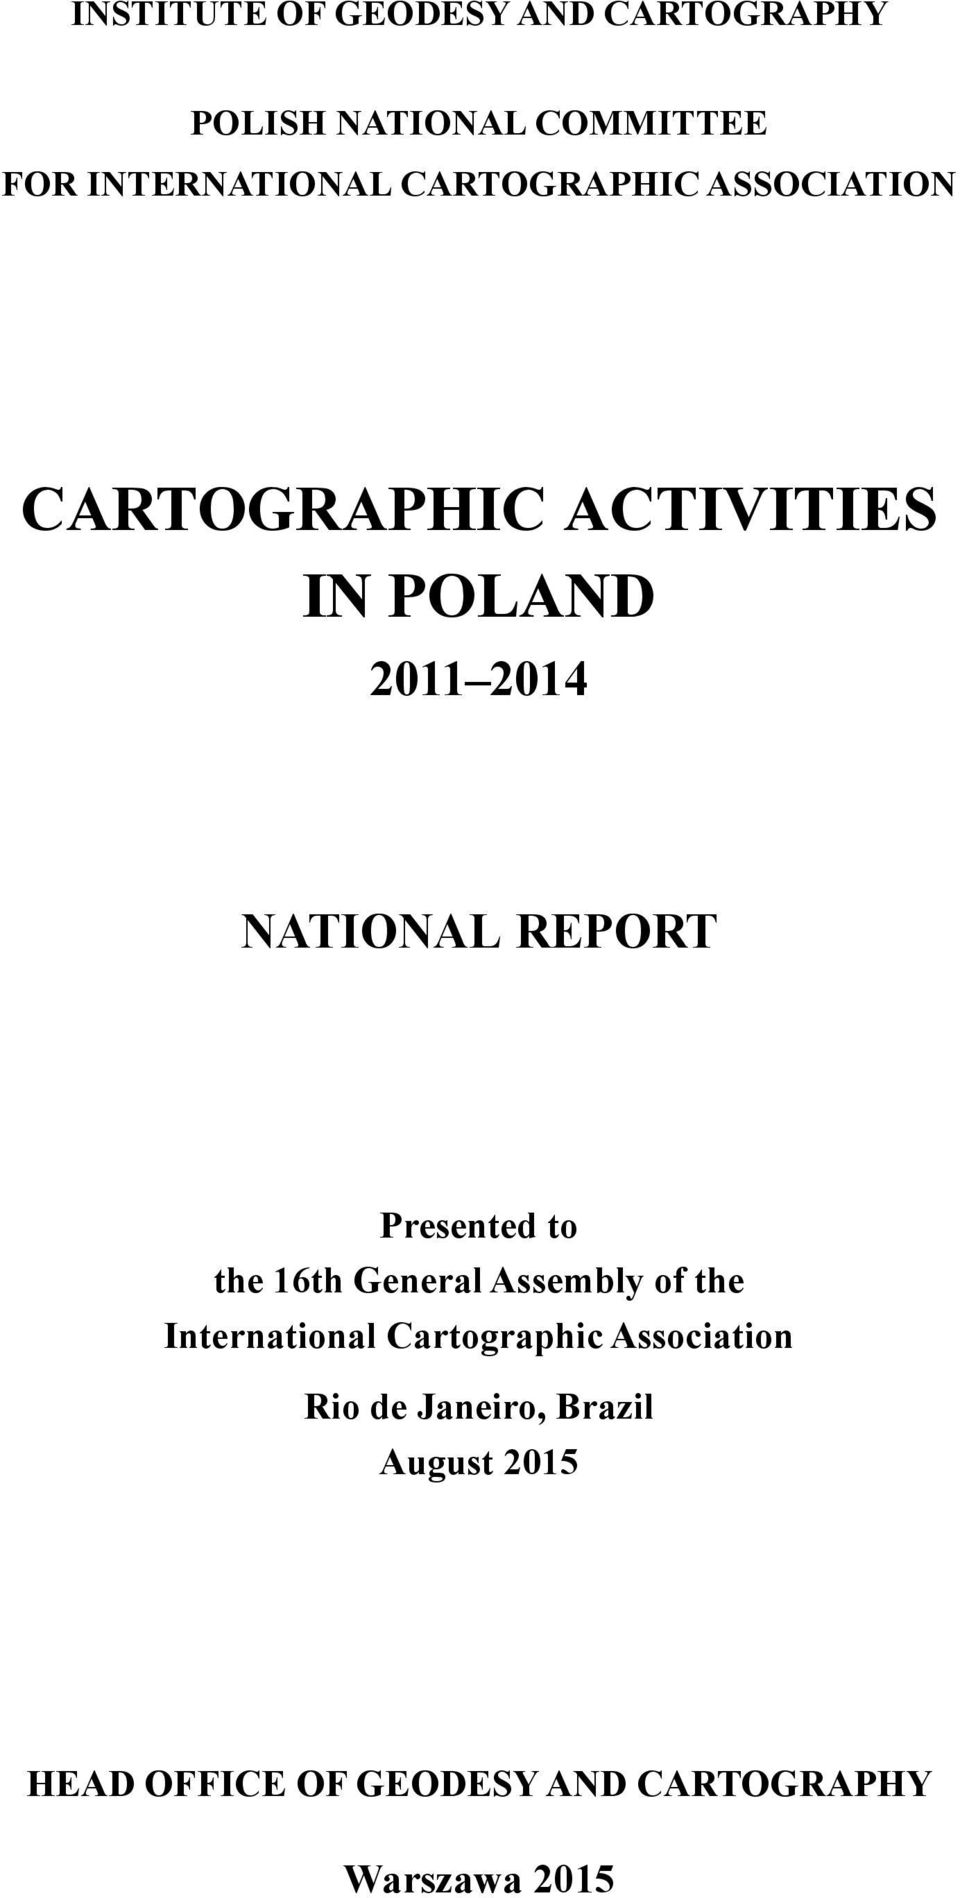 Presented to the 16th General Assembly of the International Cartographic Association